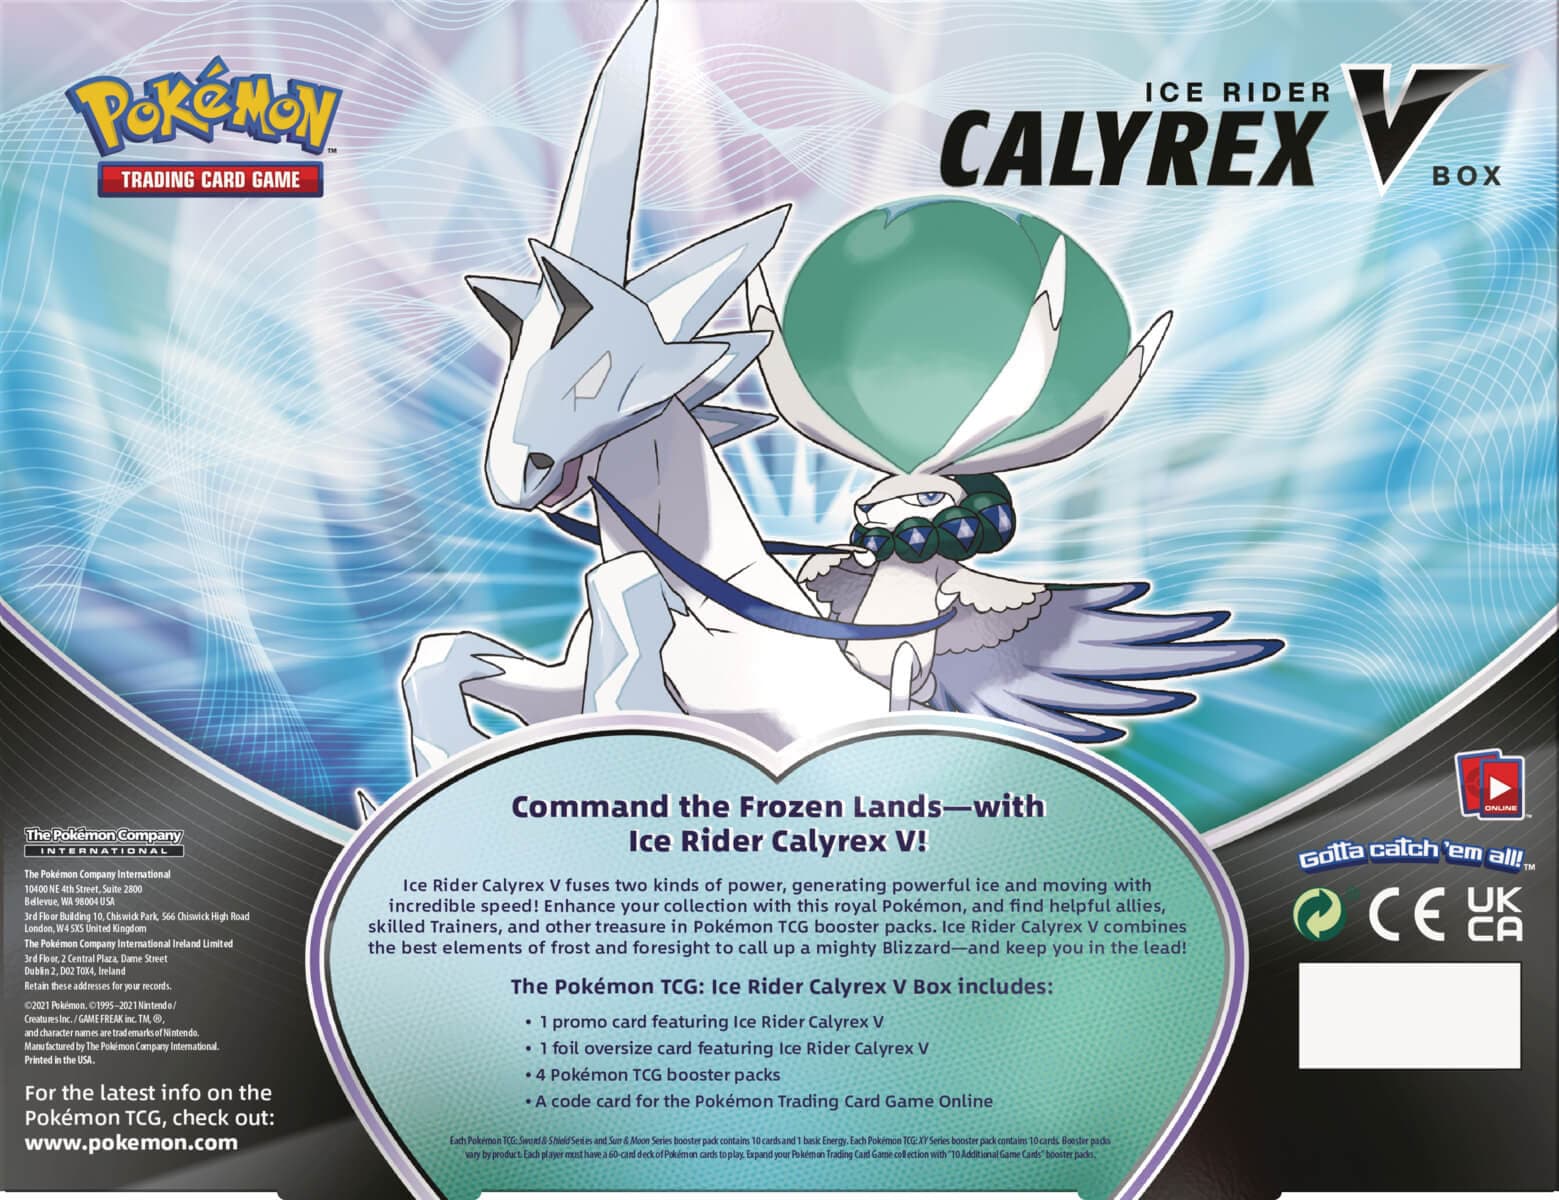 Pokemon Chilling Reign Ice Rider Calyrex V Box xccscss.